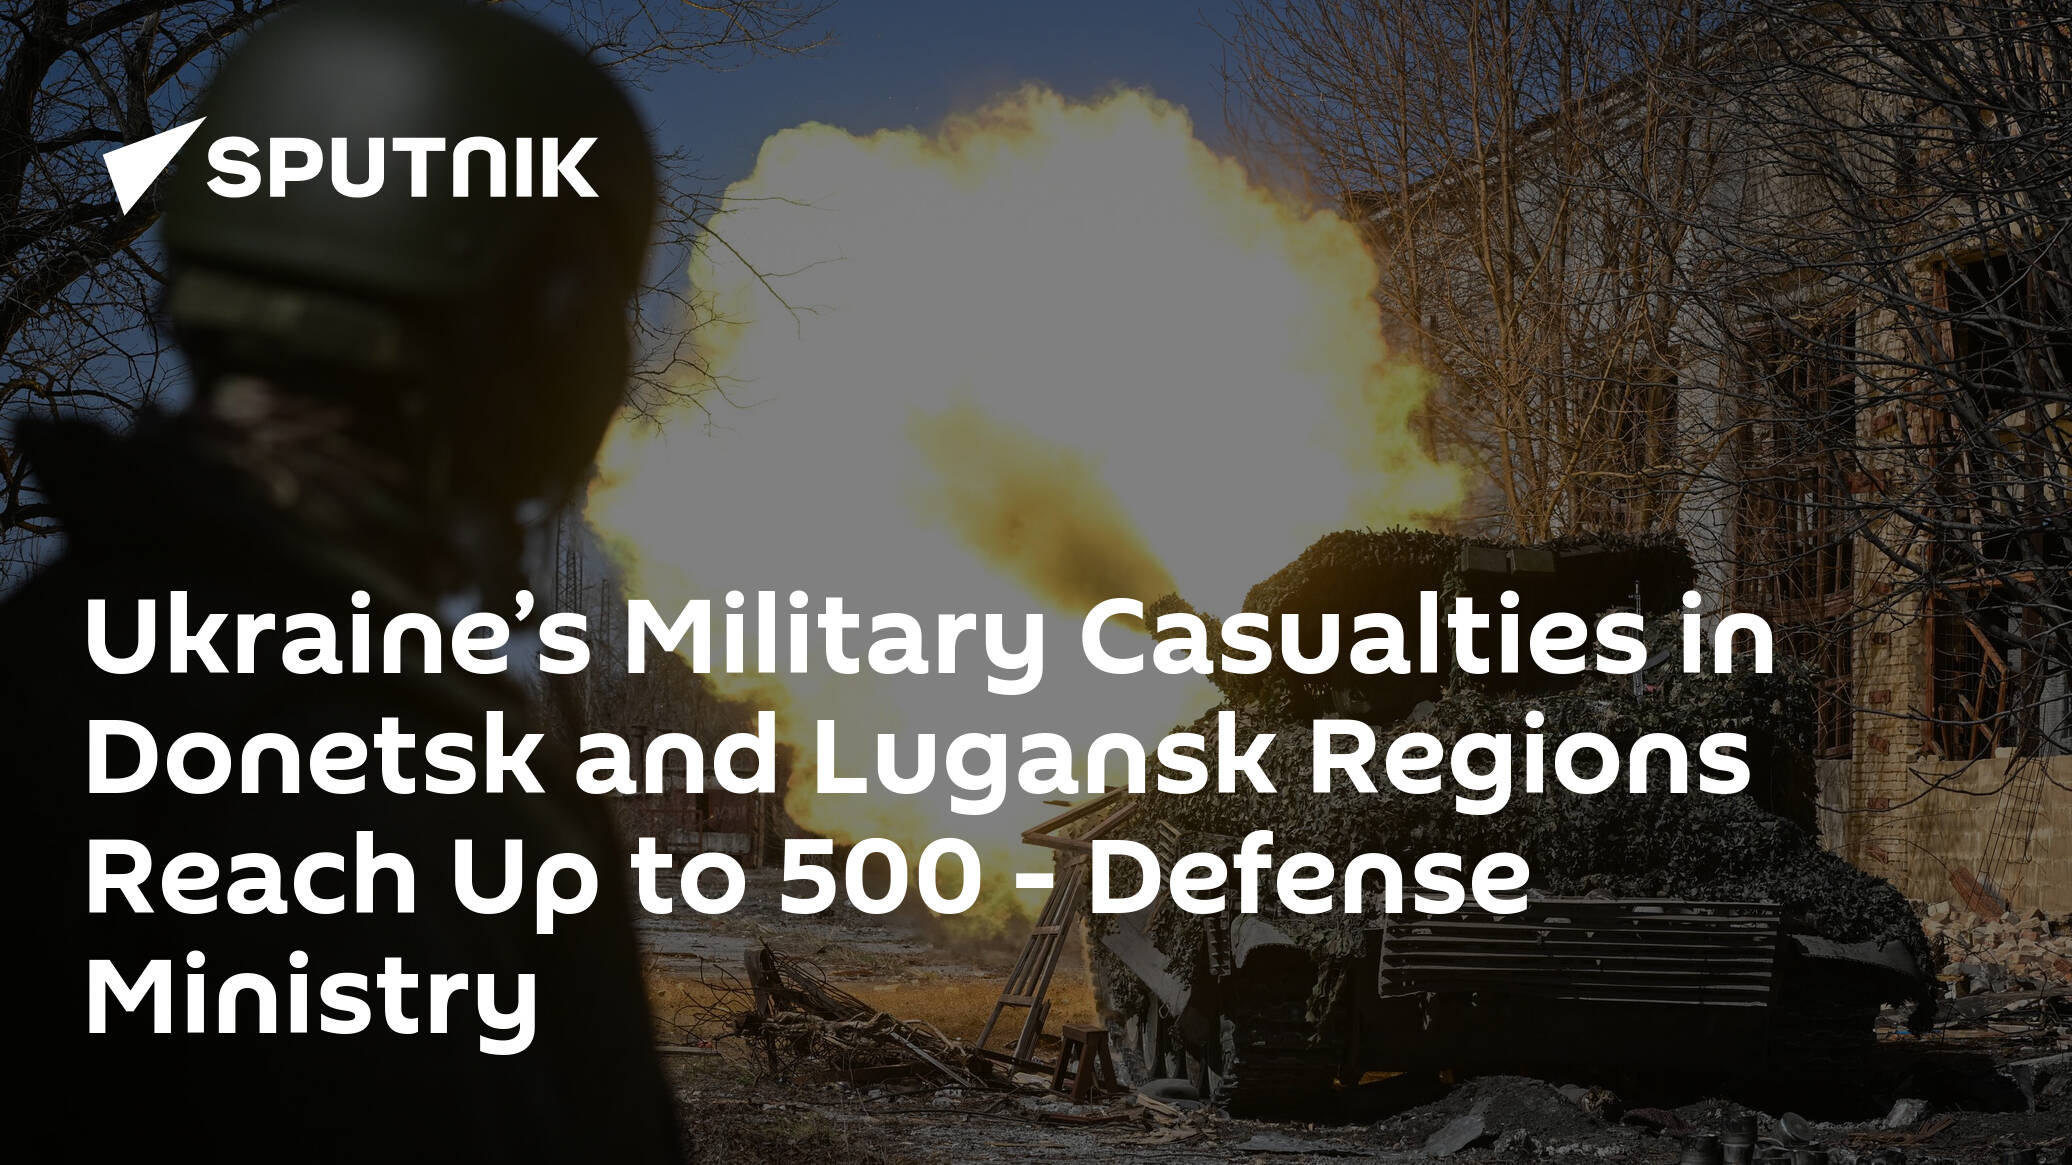 Ukraine’s Military Casualties in Donetsk and Lugansk Regions Reach Up to 500 – Defense Ministry